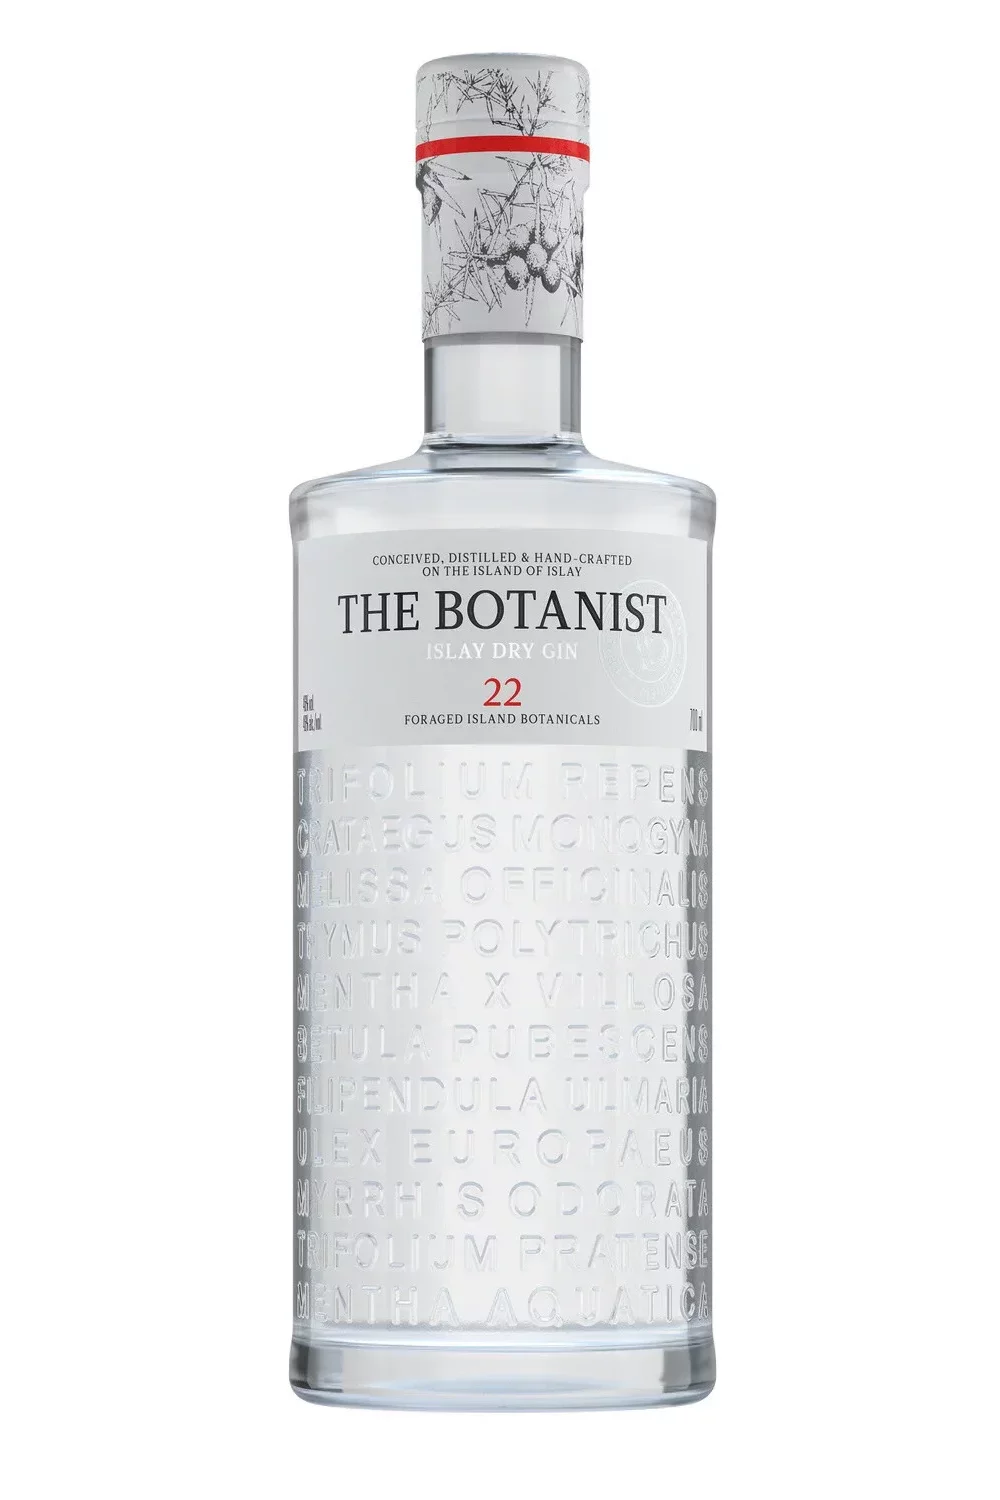 The Botanist Gin unveils “The Spirit of Community” campaign in first Super Bowl ad